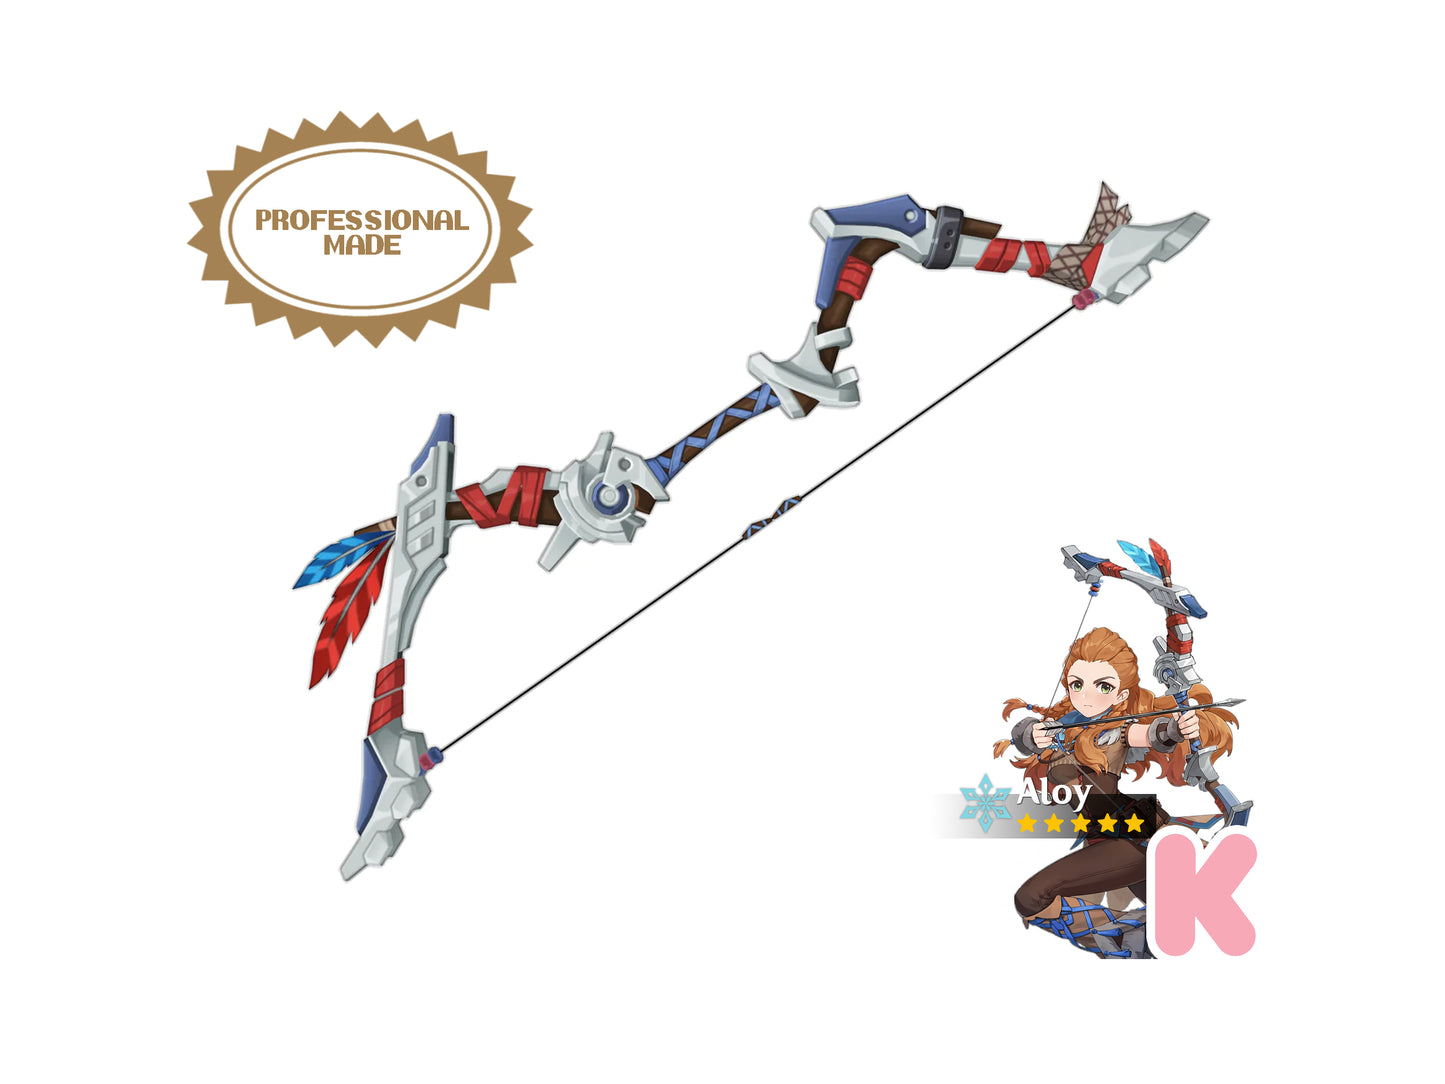 Predator Bow - Digital 3D Model Files and Physical 3D Printed Kit Options - Aloy Bow